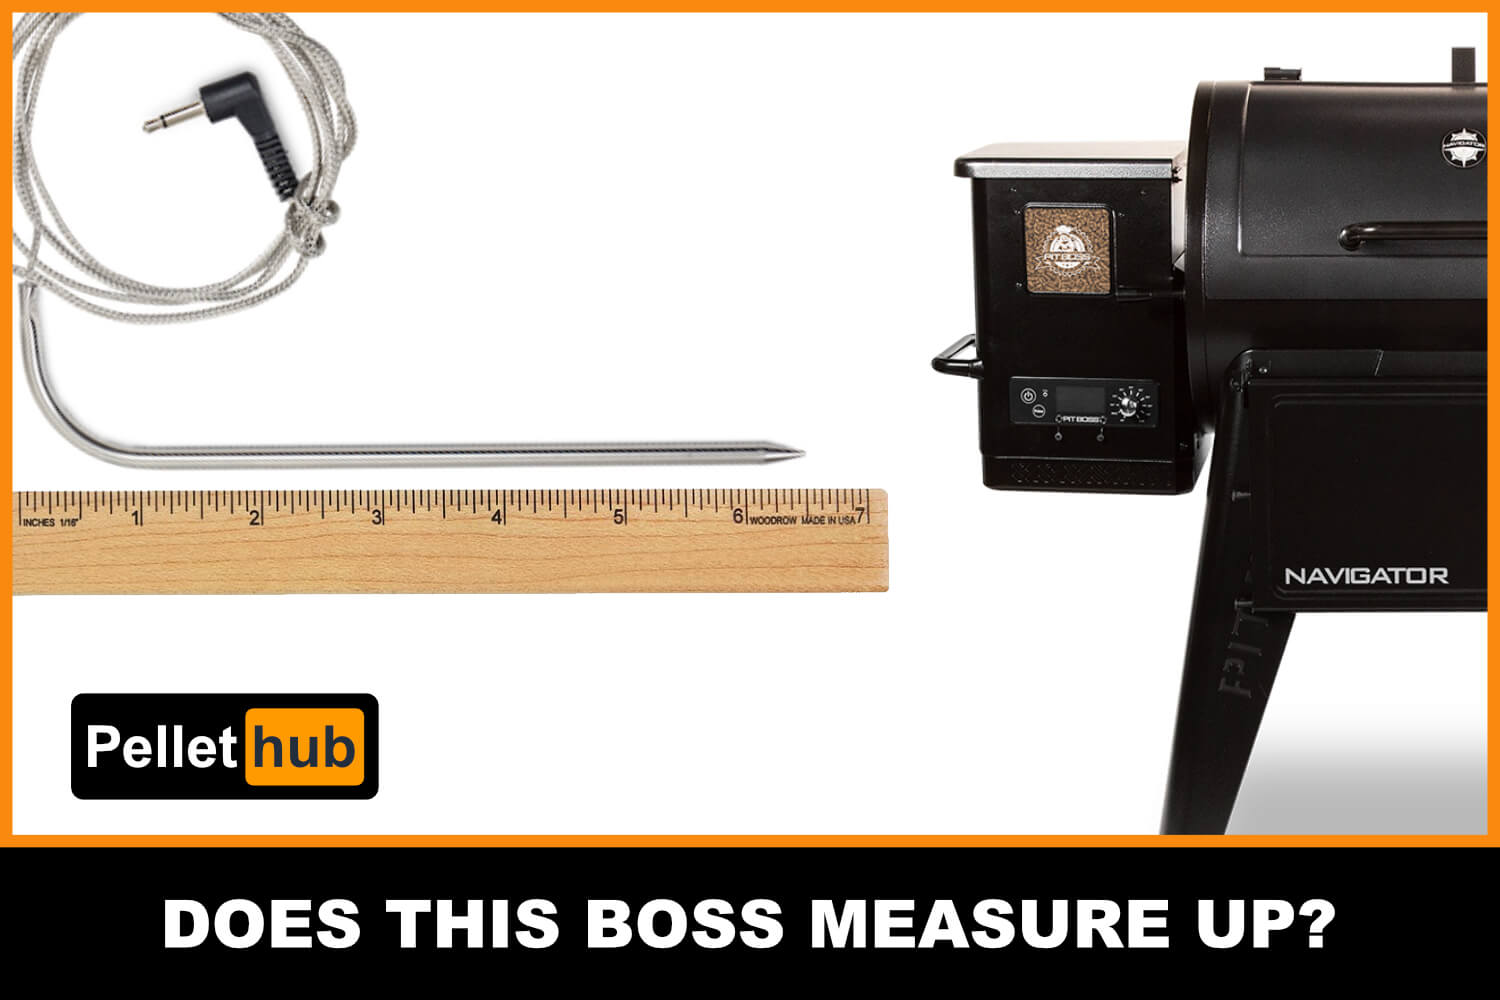 Caption "Does the Boss Measure Up?"